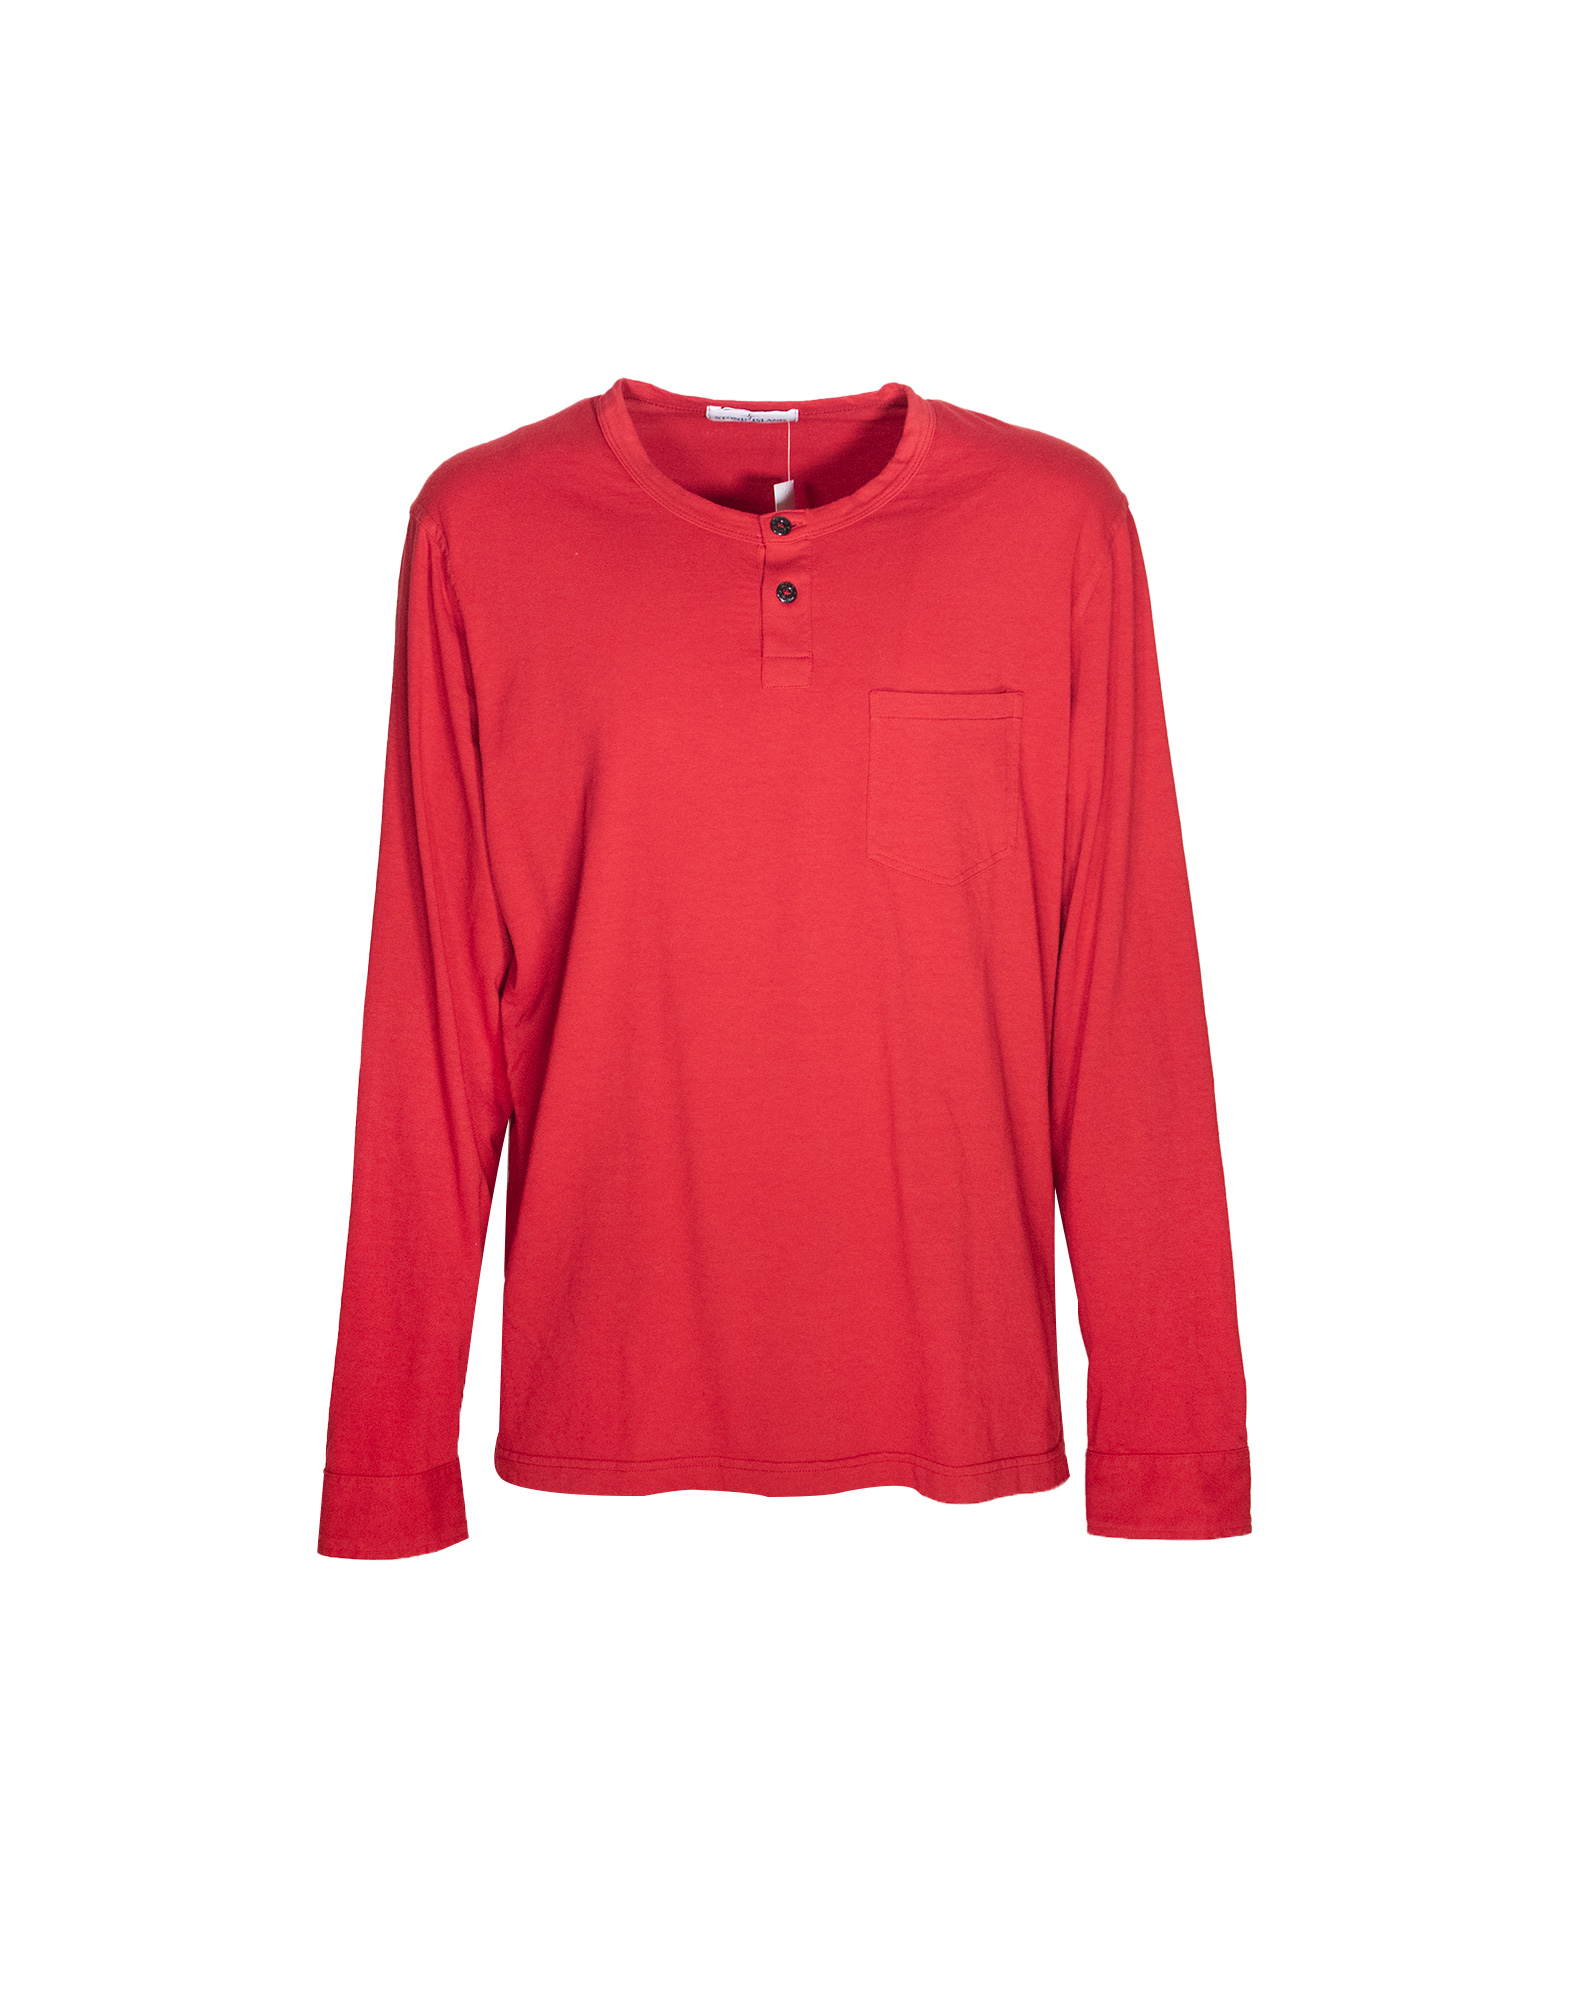 Stone Island - Red long-sleeved T-shirt